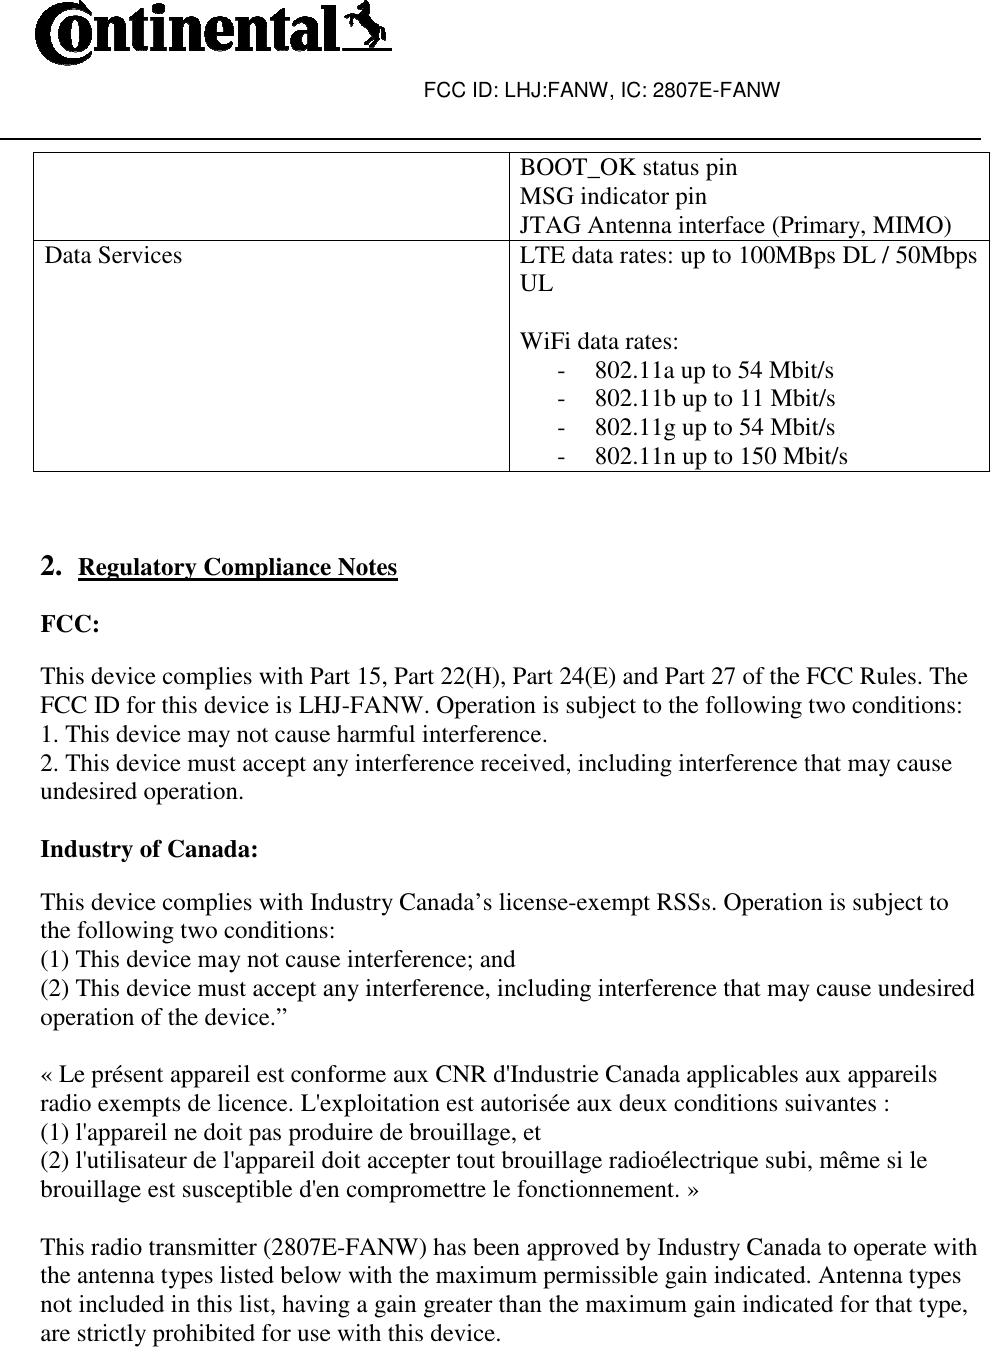  Data Services    2. Regulatory Compliance Notes FCC:  This device complies with Part 15, Part 22(H), Part 24(E) and Part 27 of the FCC Rules. The FCC ID for this device is LHJ1. This device may not cause harmful interference.2. This device must accept any interference received, including interference that may cause undesired operation.   Industry of Canada:  This device complies with Industry Canada’s licensethe following two conditions:(1) This device may not cause interference; and(2) This device must accept any interference, including interference that may cause undesiredoperation of the device.”   « Le présent appareil est conformeradio exempts de licence. L&apos;exploitation est autorisée aux deux conditions suivantes :(1) l&apos;appareil ne doit pas produire de brouillage, et(2) l&apos;utilisateur de l&apos;appareil doit accepter tout brouillagebrouillage est susceptible d&apos;en compromettre le fonctionnement. » This radio transmitter (2807Ethe antenna types listed below with the maximum permissible gain inot included in this list, having a gain greater than the maximum gain indicated for that type, are strictly prohibited for use with this device. FCC ID: LHJ:FANW, IC: 2807E-FANW  BOOT_OK status pin MSG indicator pin JTAG Antenna interface (Primary, MIMO)LTE data rates: up to 100MBps DL / 50Mbps UL  WiFi data rates:  - 802.11a up to 54 Mbit/s- 802.11b up to 11 Mbit/s- 802.11g up to 54 Mbit/s- 802.11n up to 150 Mbit/sRegulatory Compliance Notes This device complies with Part 15, Part 22(H), Part 24(E) and Part 27 of the FCC Rules. The FCC ID for this device is LHJ-FANW. Operation is subject to the following two conditions:This device may not cause harmful interference. 2. This device must accept any interference received, including interference that may cause This device complies with Industry Canada’s license-exempt RSSs. Operation is subject to the following two conditions: (1) This device may not cause interference; and (2) This device must accept any interference, including interference that may cause undesired« Le présent appareil est conforme aux CNR d&apos;Industrie Canada applicables aux appareils radio exempts de licence. L&apos;exploitation est autorisée aux deux conditions suivantes :(1) l&apos;appareil ne doit pas produire de brouillage, et (2) l&apos;utilisateur de l&apos;appareil doit accepter tout brouillage radioélectrique subi, même si lebrouillage est susceptible d&apos;en compromettre le fonctionnement. » This radio transmitter (2807E-FANW) has been approved by Industry Canada to operate with the antenna types listed below with the maximum permissible gain indicated. Antenna types not included in this list, having a gain greater than the maximum gain indicated for that type, are strictly prohibited for use with this device. JTAG Antenna interface (Primary, MIMO) LTE data rates: up to 100MBps DL / 50Mbps 802.11a up to 54 Mbit/s 802.11b up to 11 Mbit/s Mbit/s 802.11n up to 150 Mbit/s This device complies with Part 15, Part 22(H), Part 24(E) and Part 27 of the FCC Rules. The FANW. Operation is subject to the following two conditions: 2. This device must accept any interference received, including interference that may cause on is subject to (2) This device must accept any interference, including interference that may cause undesired aux CNR d&apos;Industrie Canada applicables aux appareils radio exempts de licence. L&apos;exploitation est autorisée aux deux conditions suivantes : radioélectrique subi, même si le FANW) has been approved by Industry Canada to operate with ndicated. Antenna types not included in this list, having a gain greater than the maximum gain indicated for that type, 